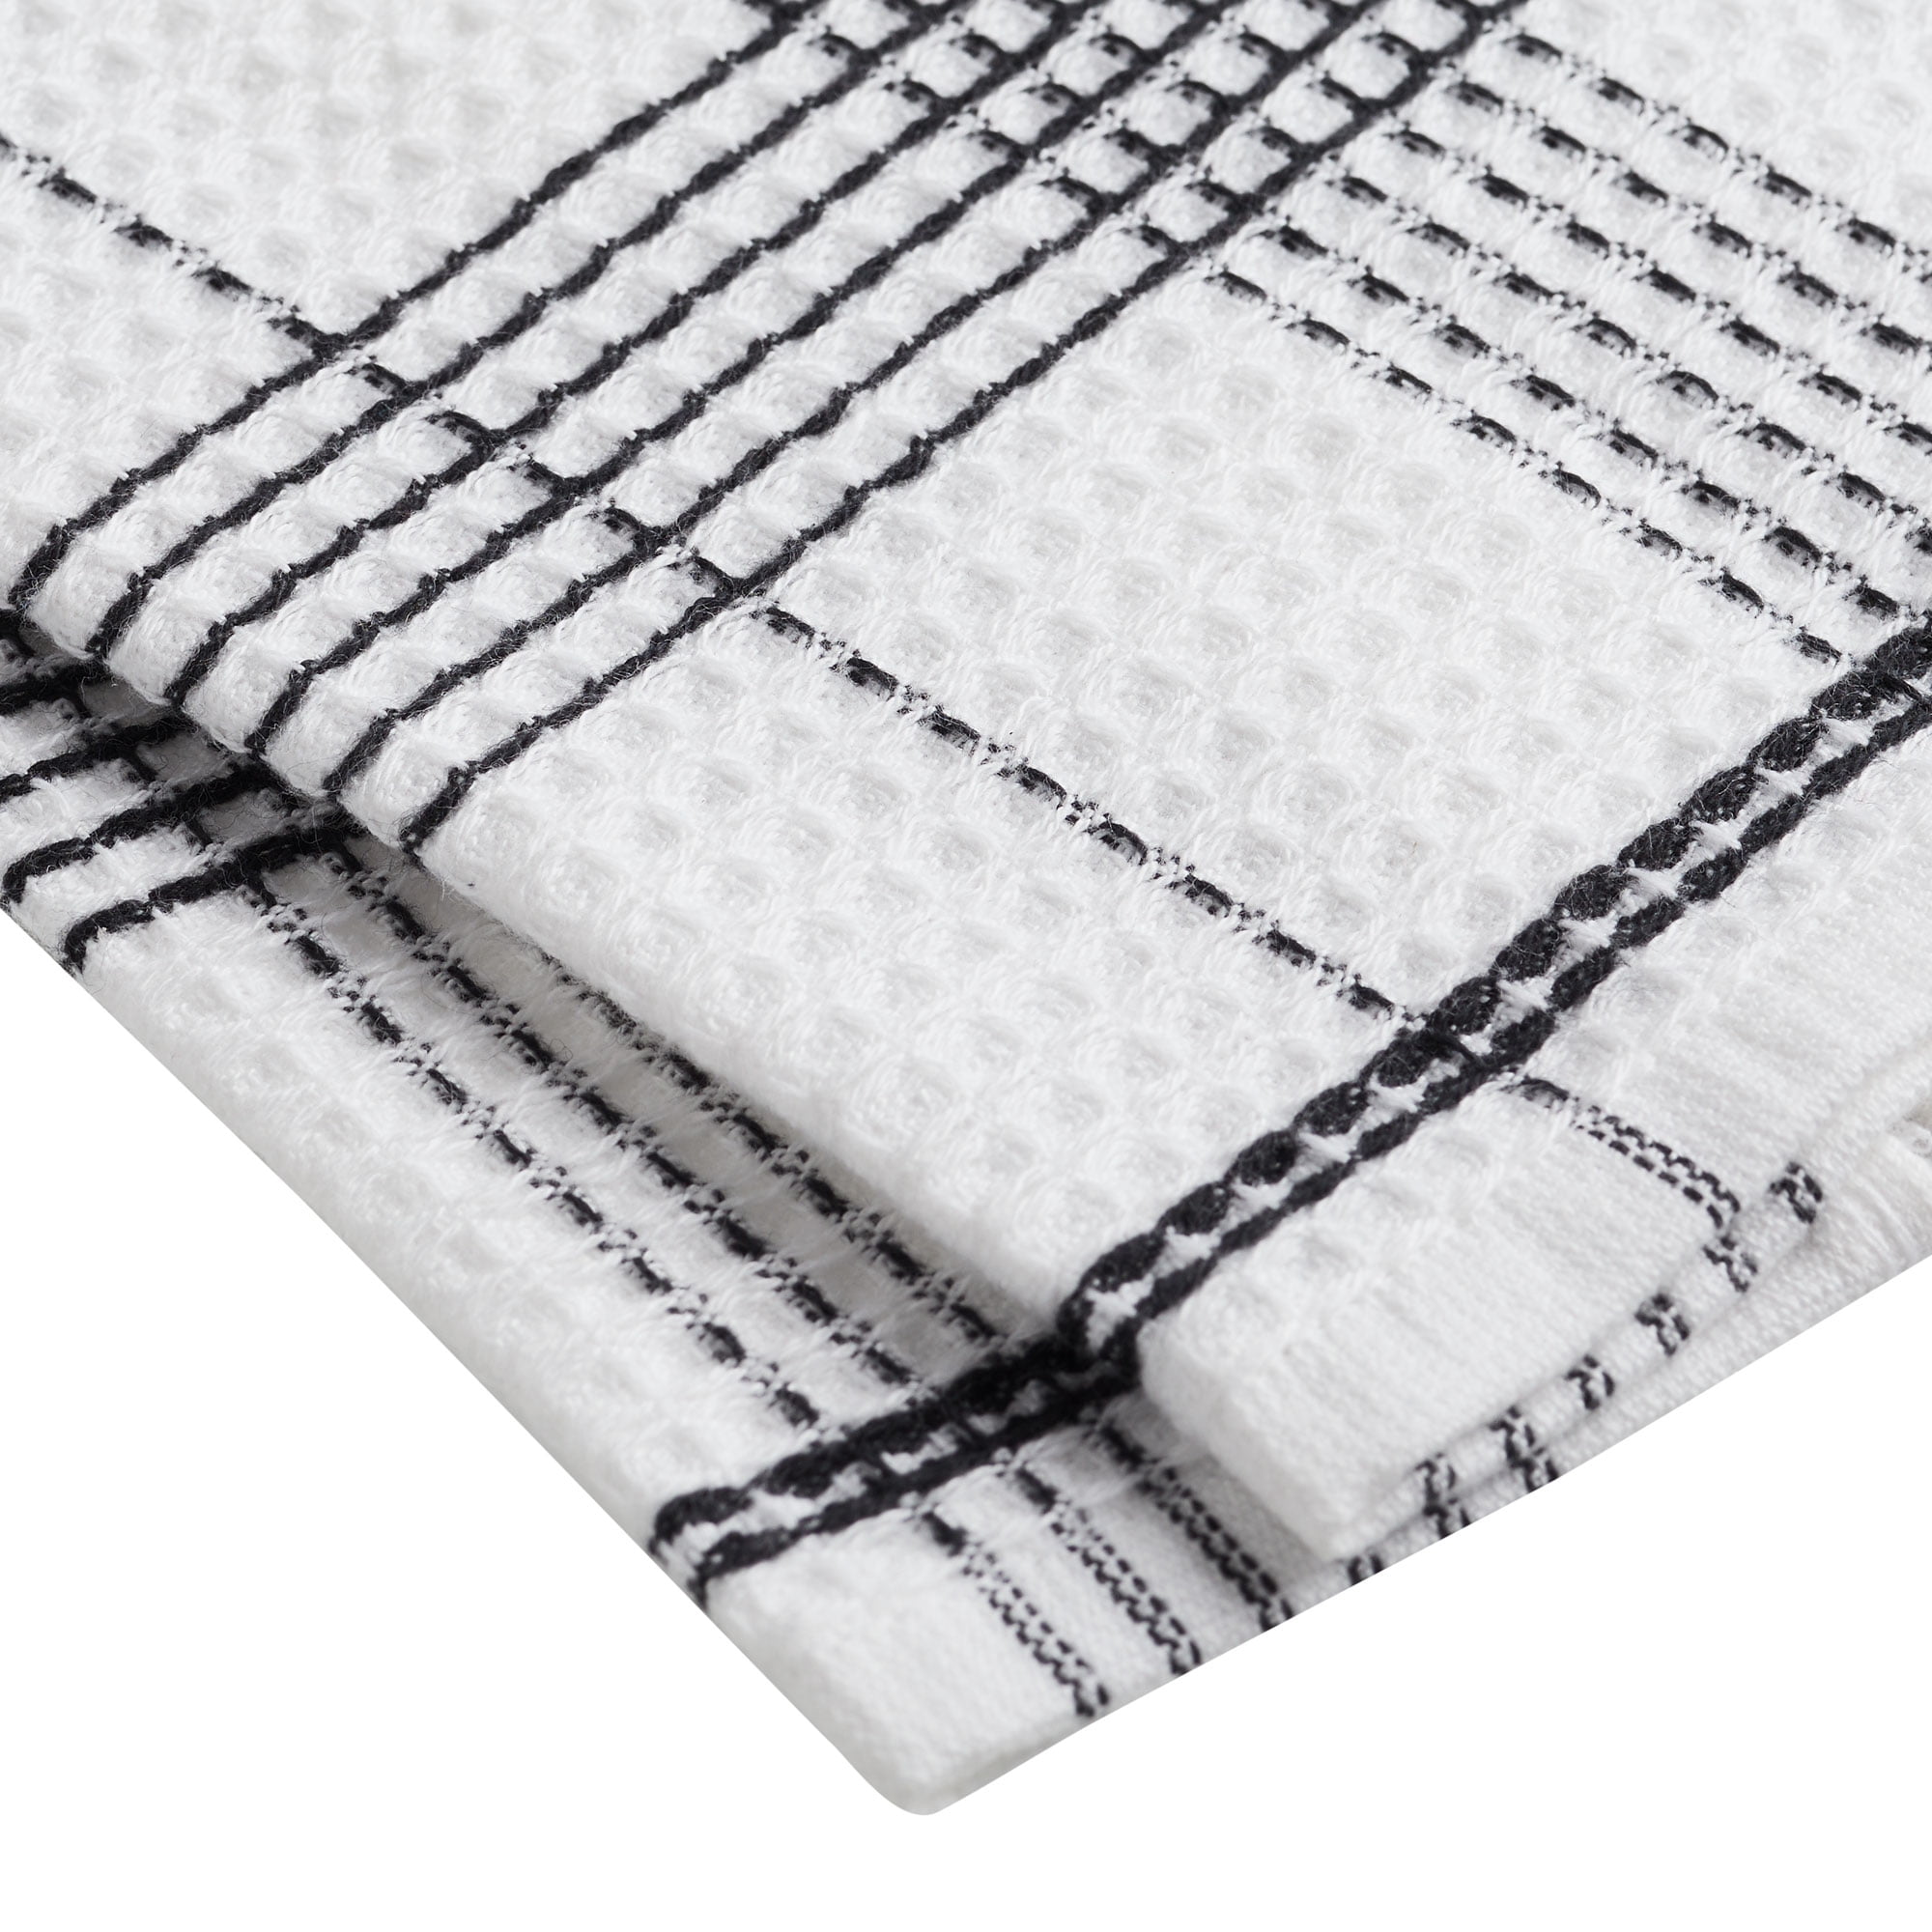  Zadaling Geo Kitchen Towels,White Grey Black Red Abstract  Irregular Geometric 16x28 Inches Soft Kitchen Dish Cloth,Cotton Tea Towels/Bar  Towels/Hand Towels,(2 Pack) : Home & Kitchen